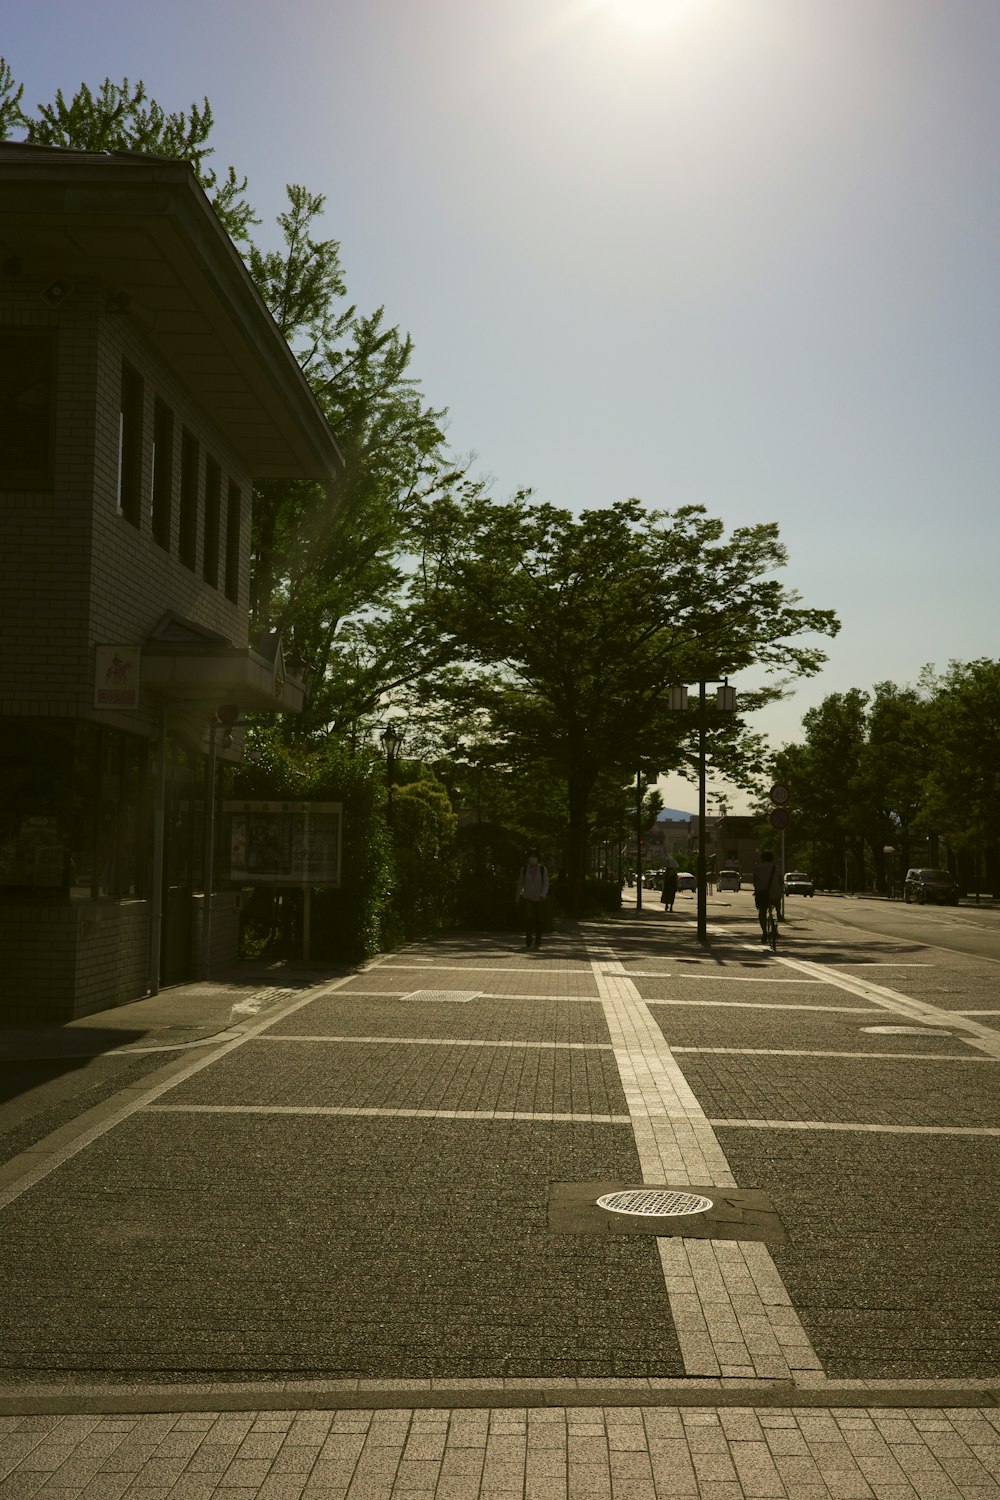 the sun shines brightly over the empty street